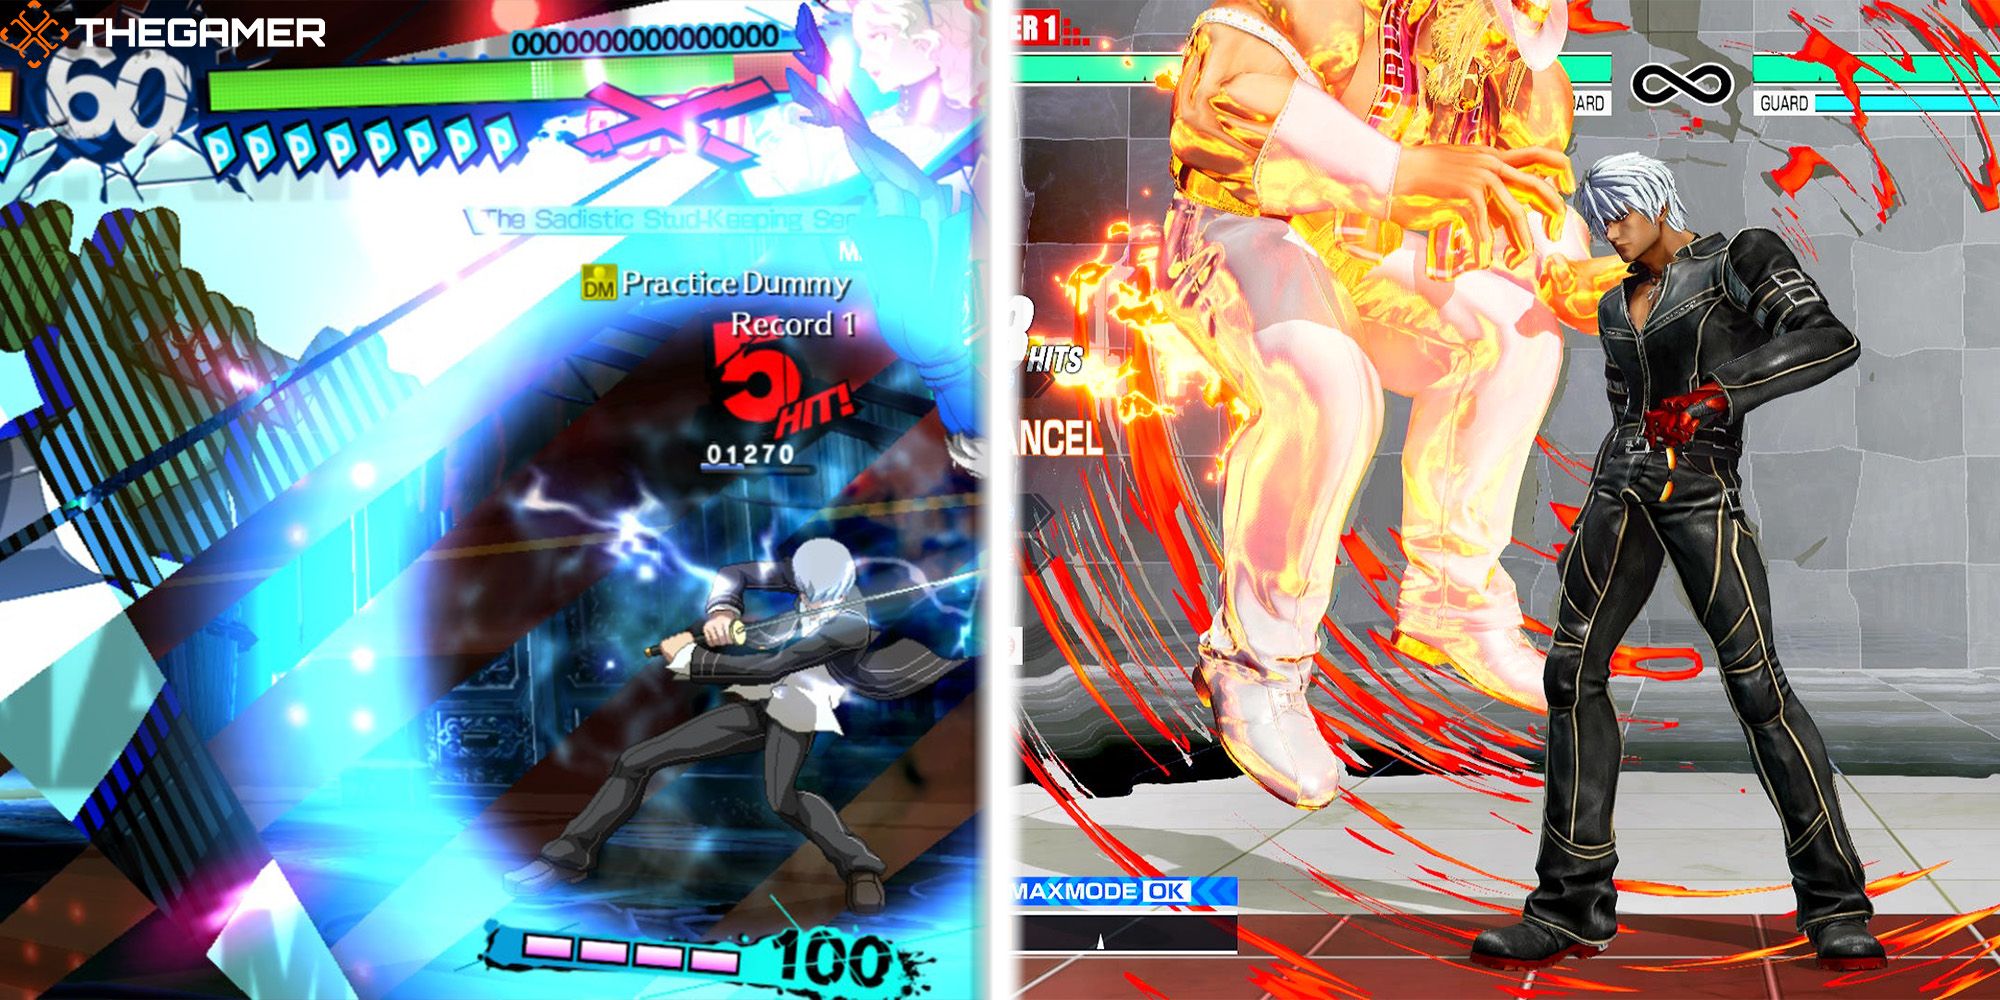 [Left Panel] Yu performs a super cancel in a battle against Margaret. Persona 4 Arena Ultimax. [Right Panel] K' uses a super cancel against Maximov at the Training Stage. The King Of Fighters 15.